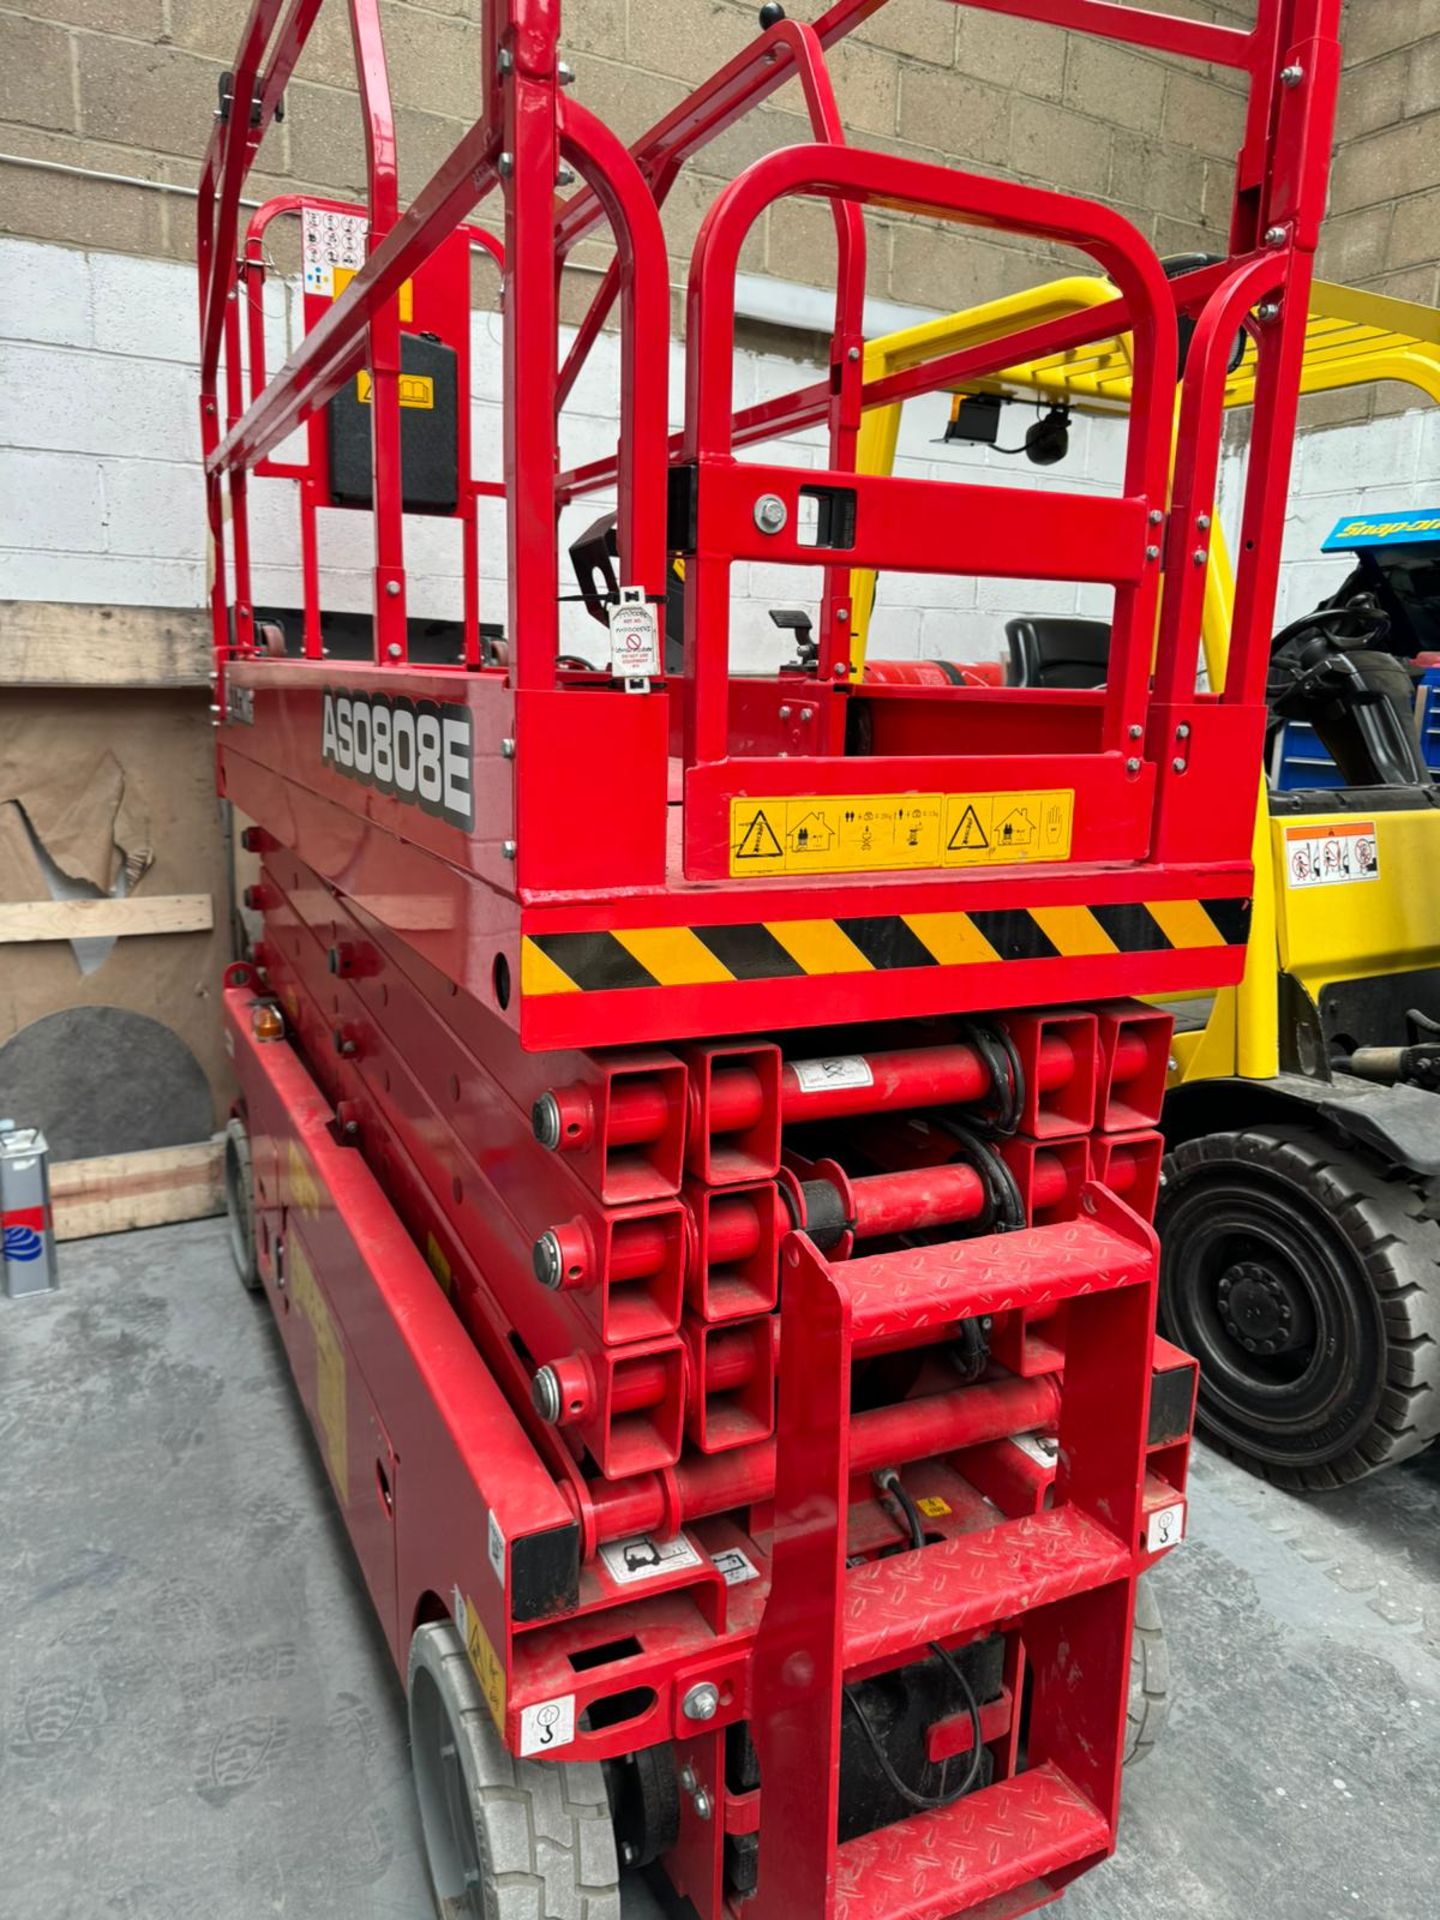 LGMG ELEVATING WORK PLATFORM, MODEL: AS0808E, YOM 2022 MAX WORKING HEIGHT 10M MACHINE WEIGHT: 2140KG - Image 2 of 8